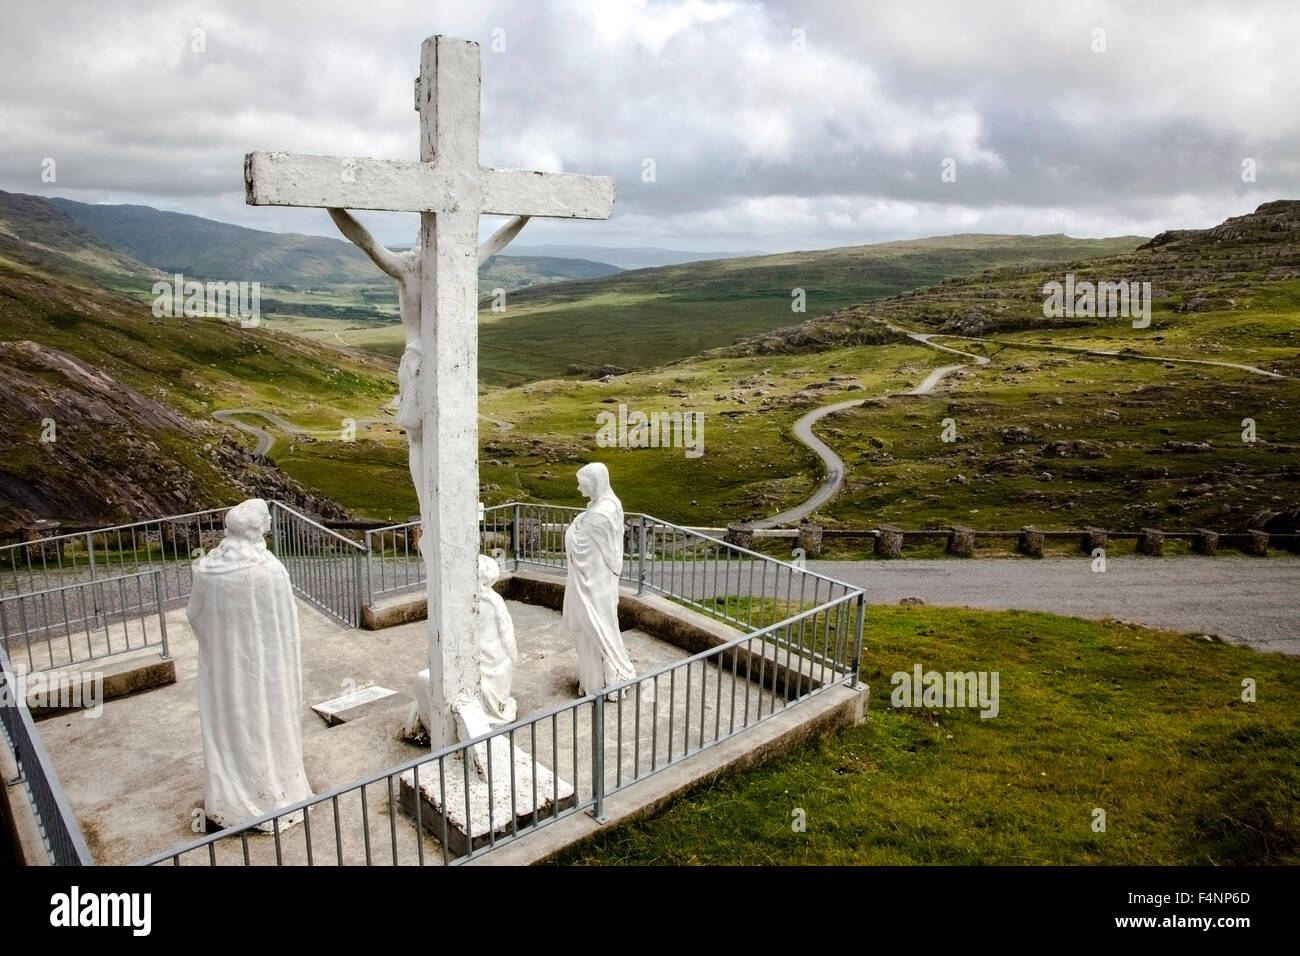 Catholic iconography remains common in parts of rural Ireland. This crucifixion scene overlooks the narrow winding Healy Pass between Cork and Kerry Stock Photo